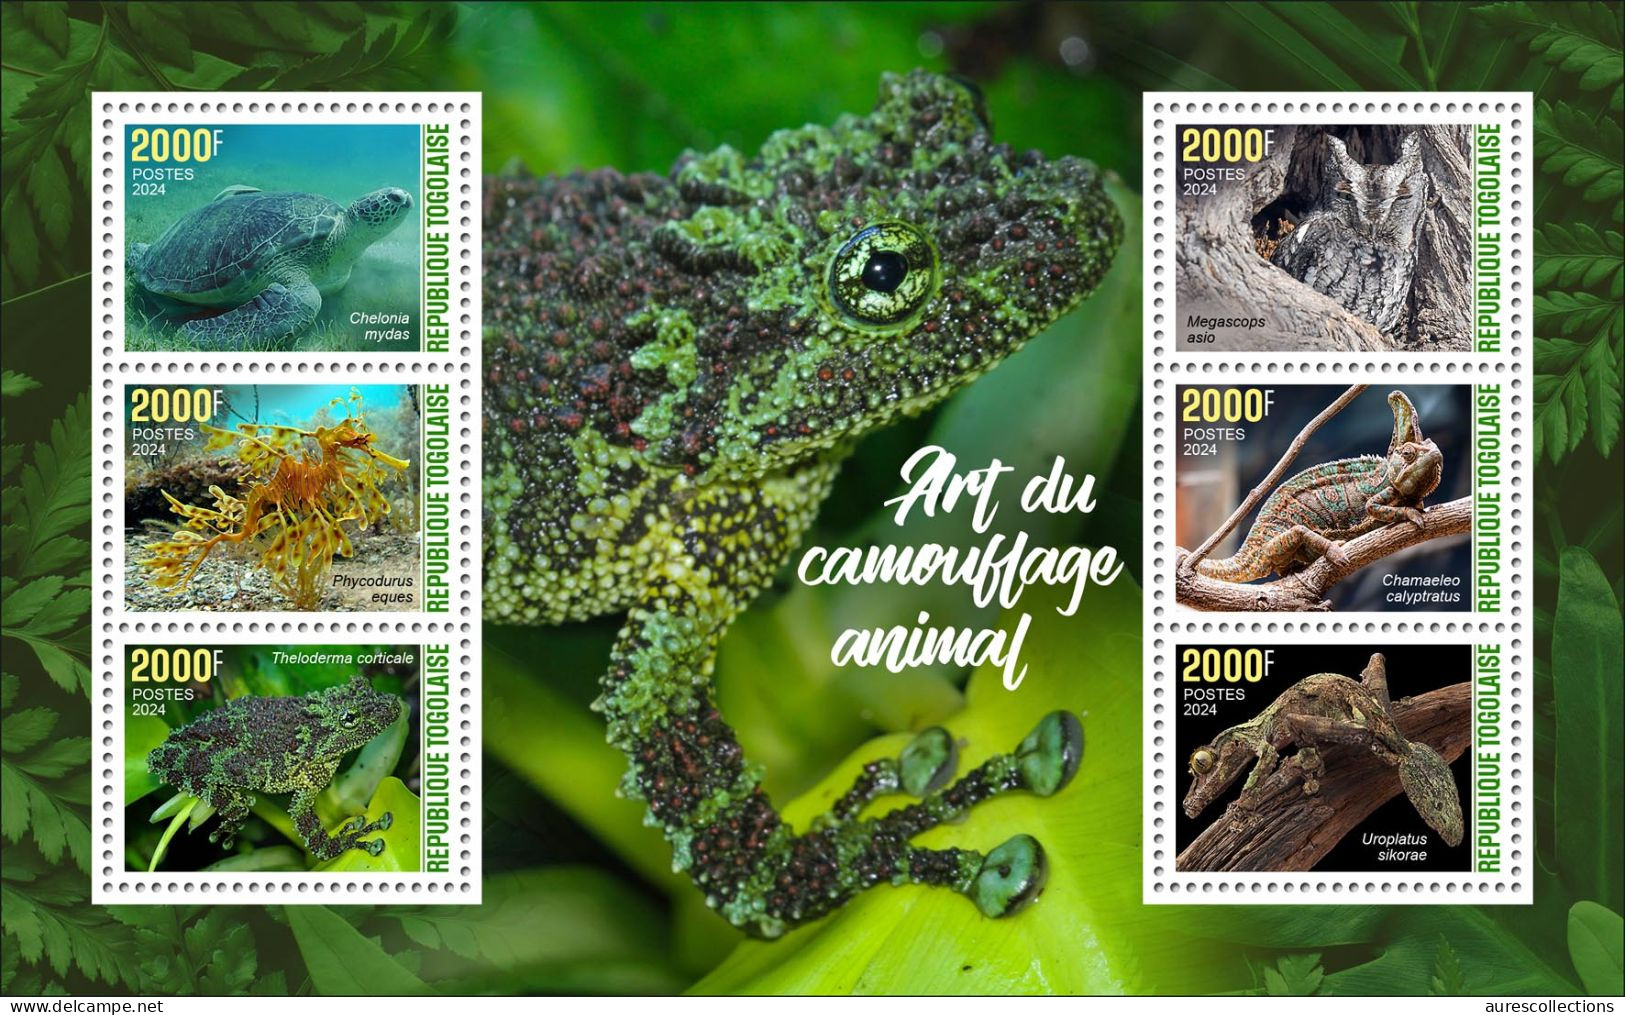 TOGO 2024 MS 6V - CAMOUFLAGE - FROG FROGS TURTLES TURTLE OWL OWLS GECKO CHAMELEON SEAHORSE HIPPOCAMPE REPTILES - MNH - Ranas